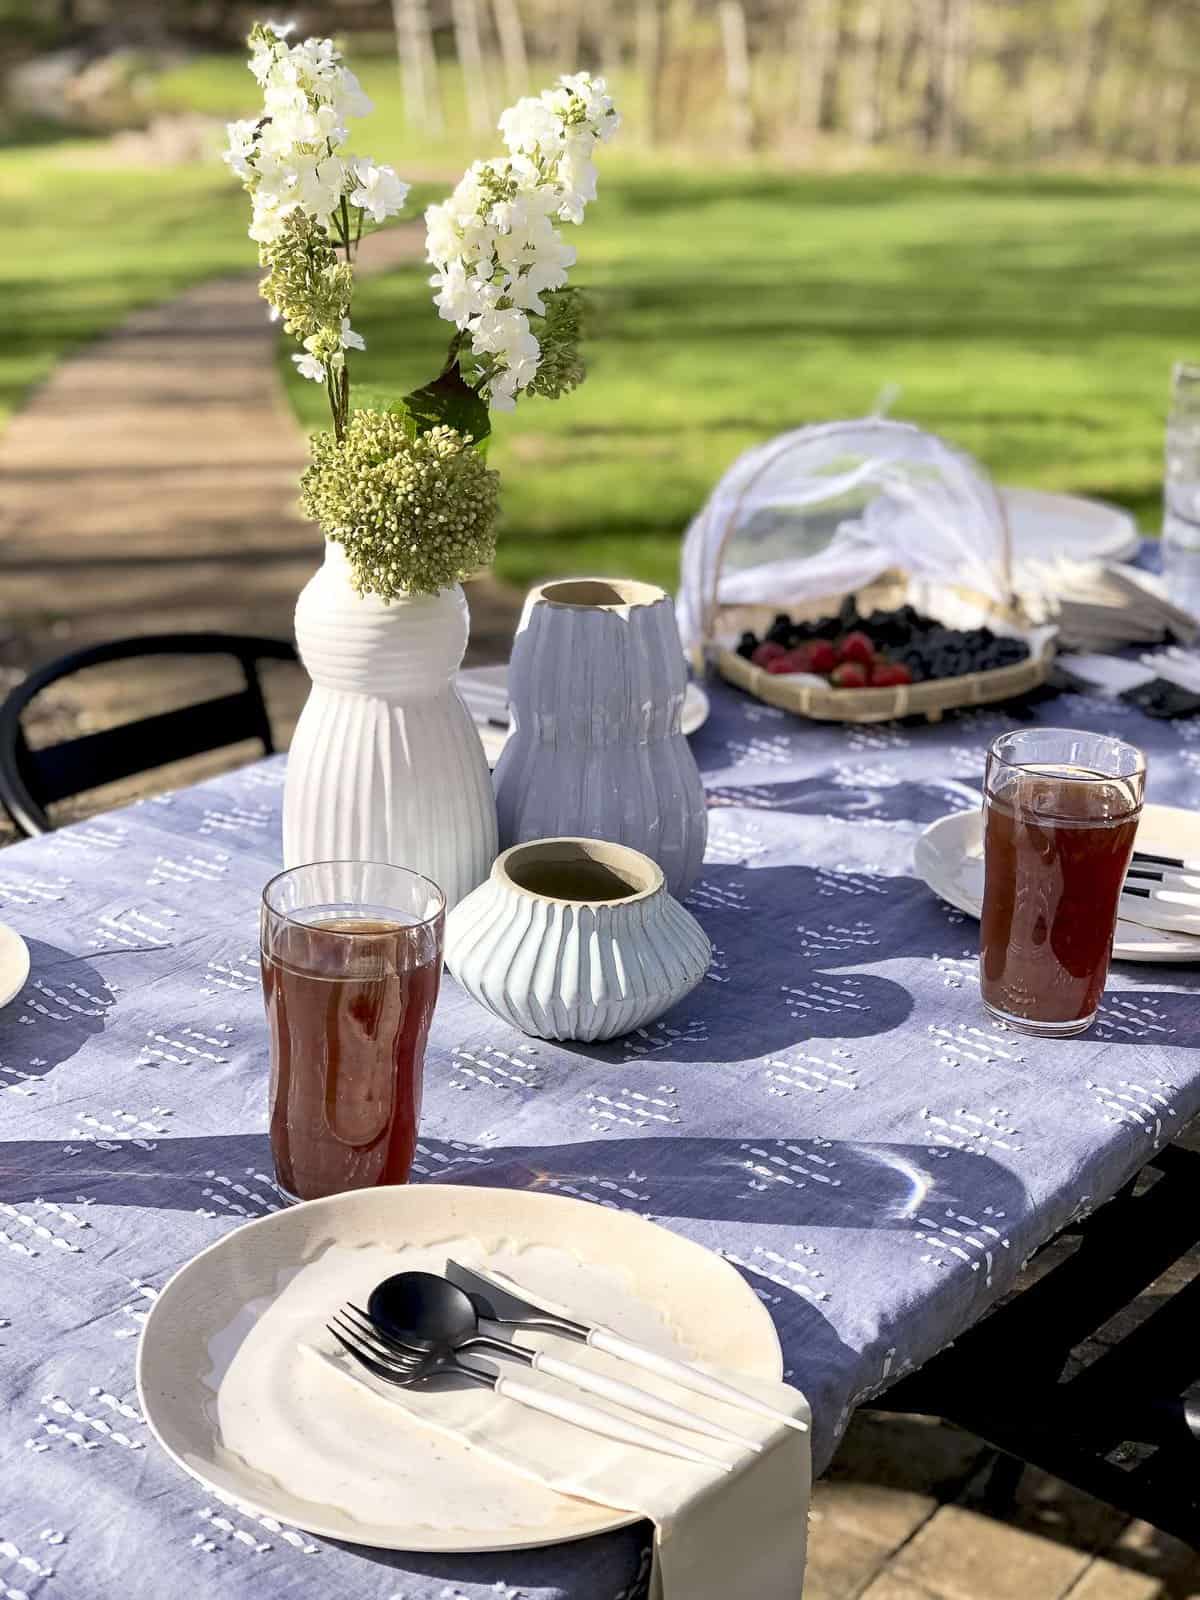 Summer dinner parties should be laid back and fun! Use these simple summer dinner party ideas with 5 tablescape essentials for your next outdoor party! #summerdining #summerparty #tablescapeideas